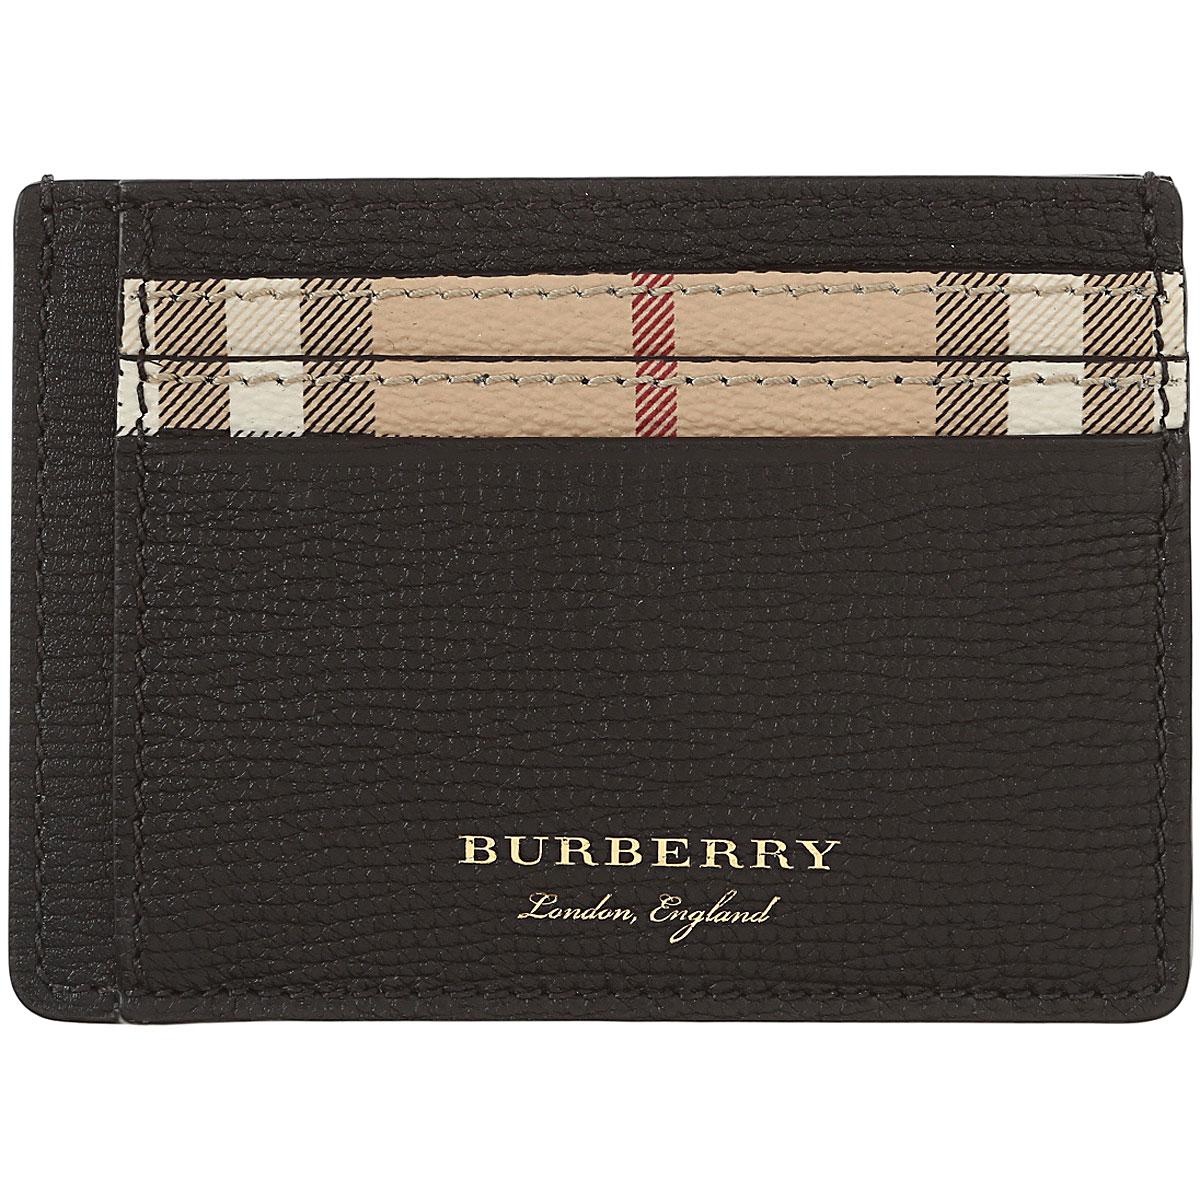 Burberry Wallet Mens Sale on Sale, 43% OFF | www.angloamericancentre.it